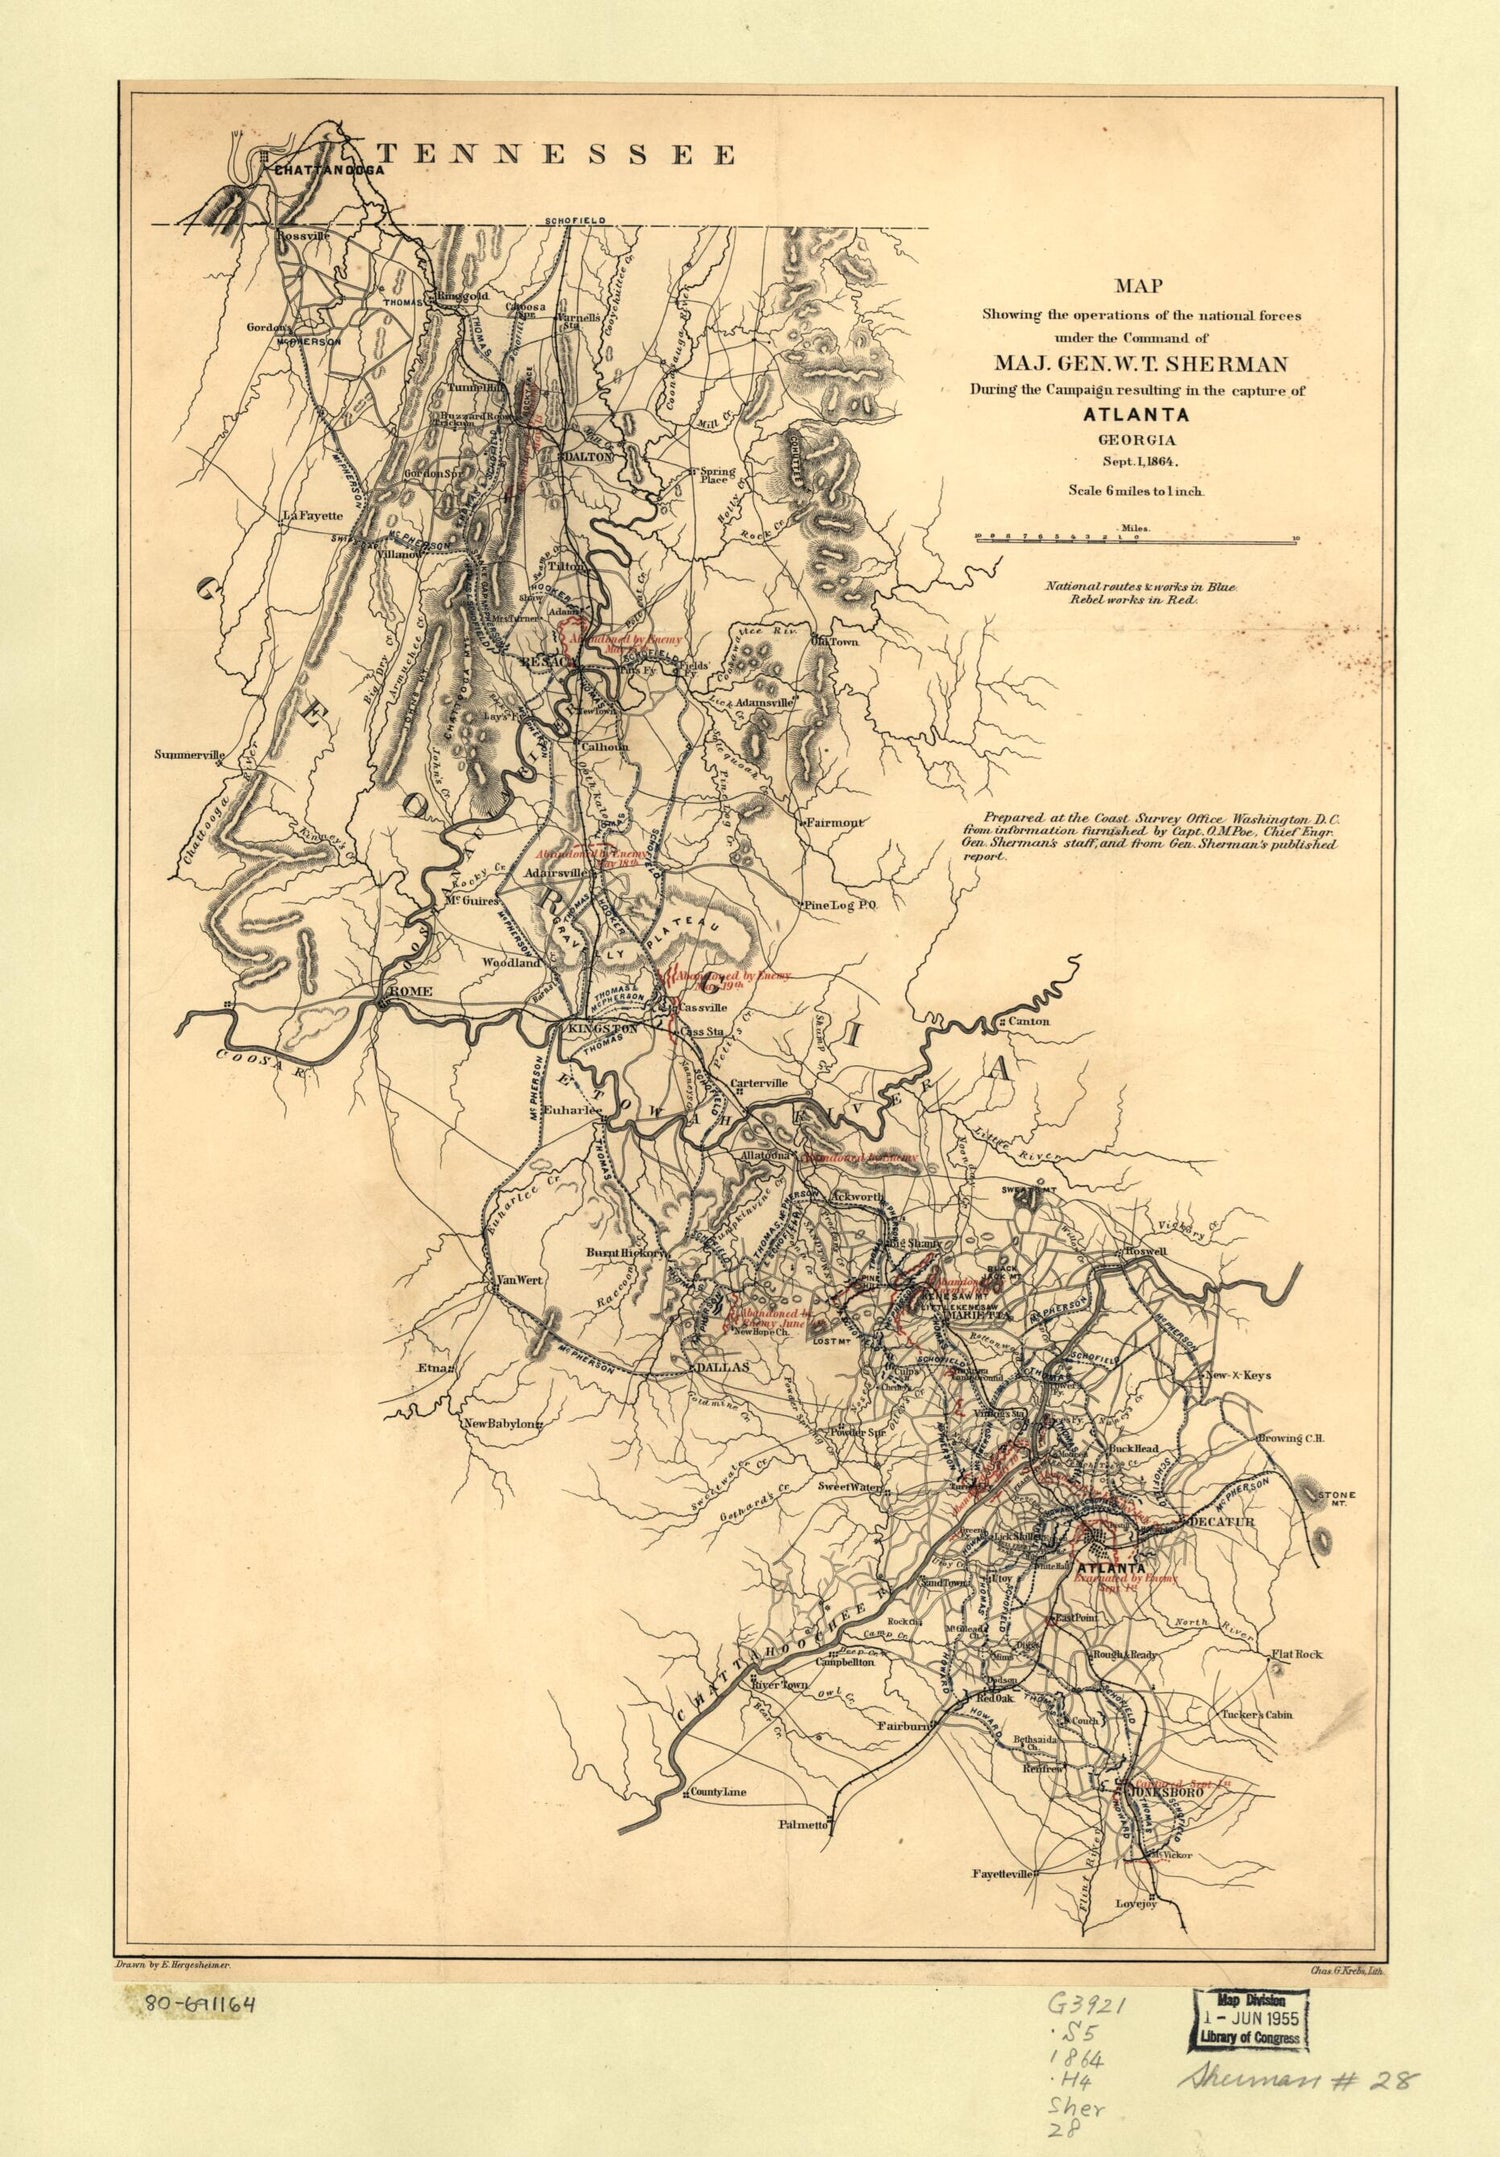 This old map of Map Showing the Operations of the National Forces Under the Command of Maj. Gen. W.T. Sherman During the Campaign Resulting In the Capture of Atlanta, Georgia, Sept. 1, from 1864 was created by E. (Edwin) Hergesheimer, Charles G. Krebs, O